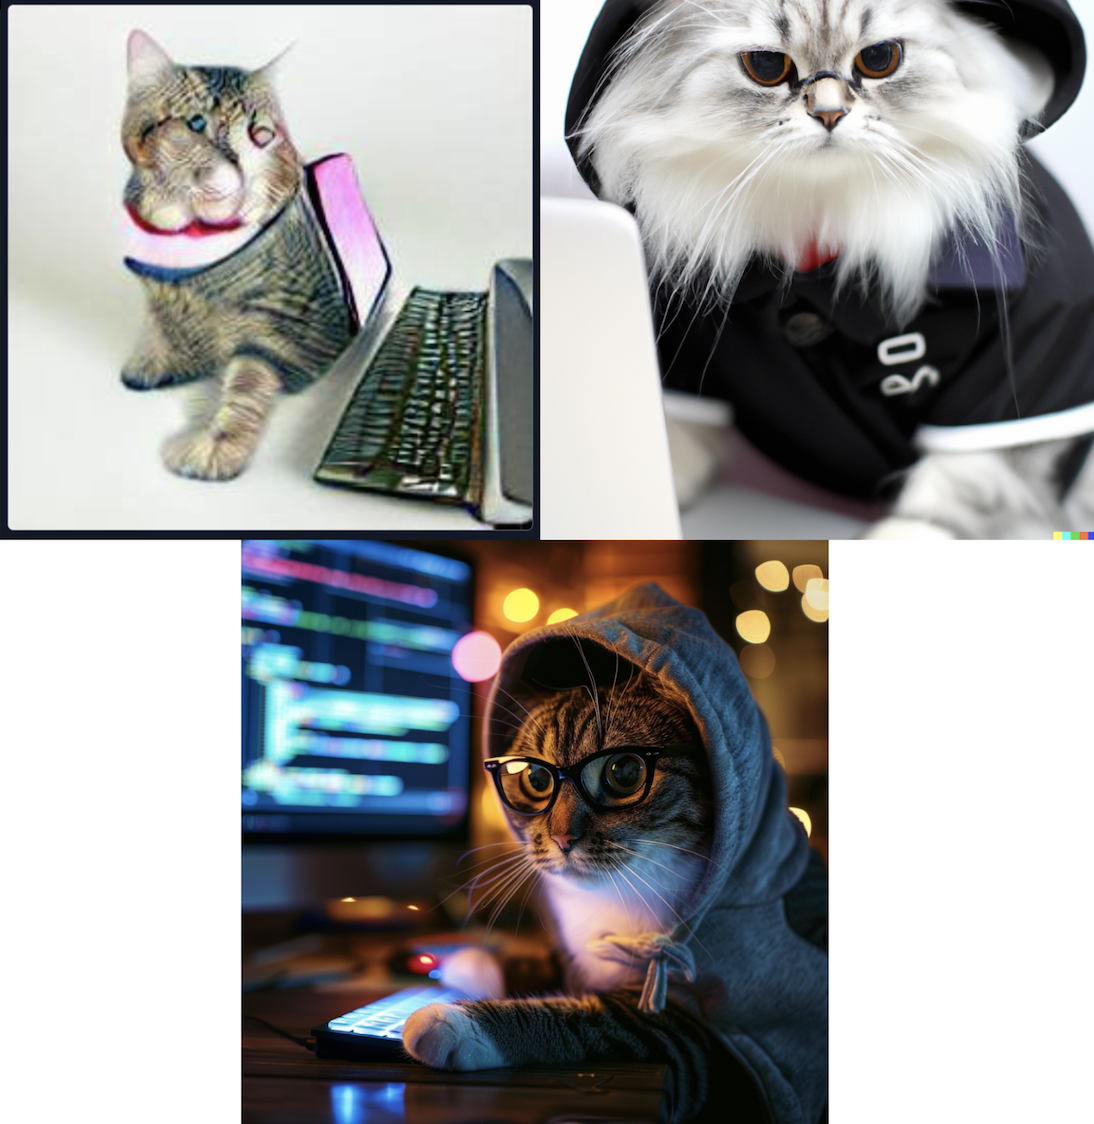 Three cats dressed as computer programmers generated by different AI software.